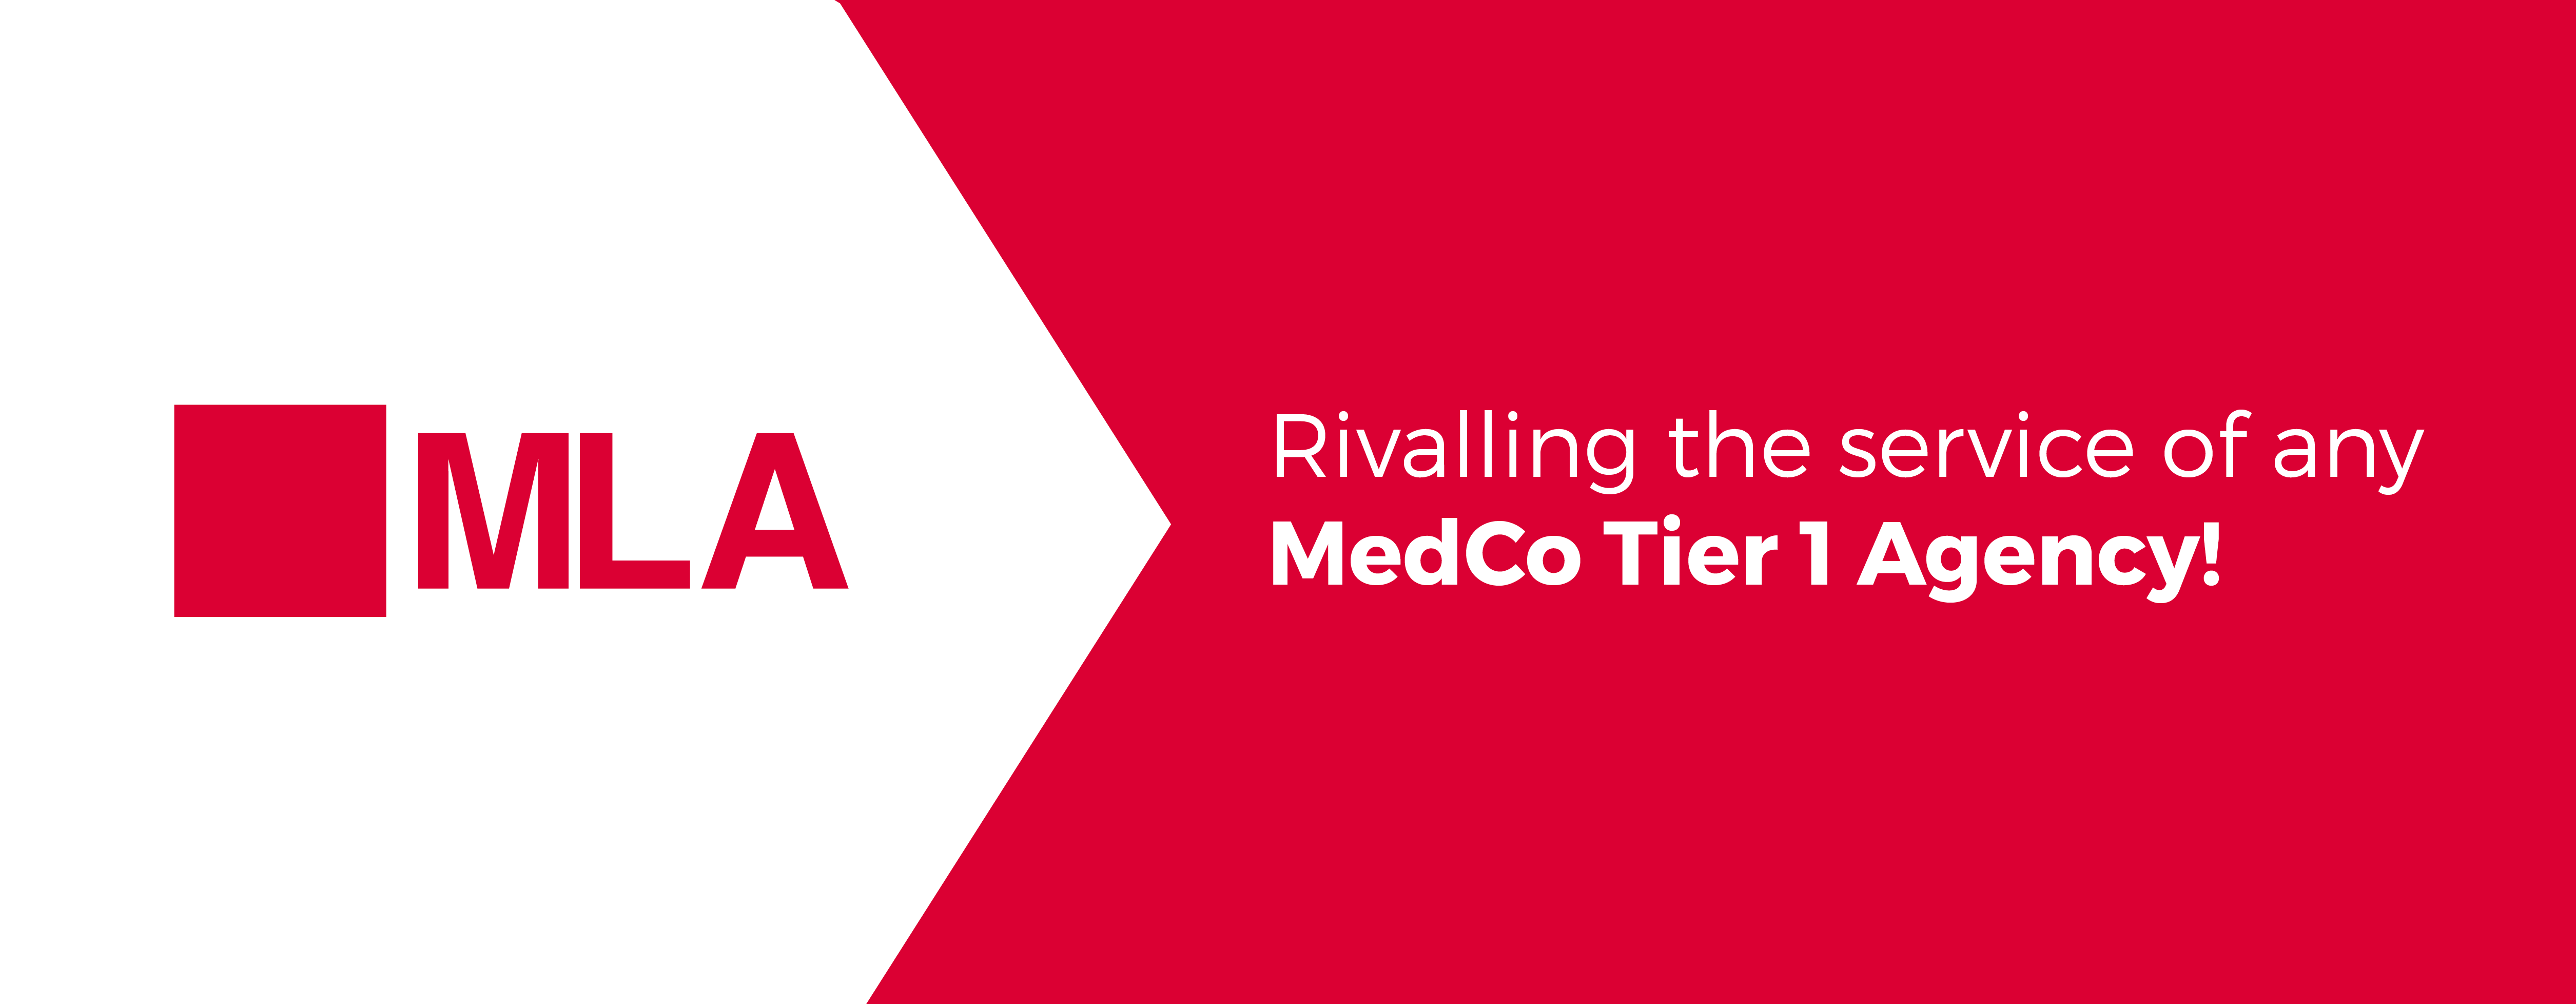 MLA - Rivalling the service of any MedCo Tier 1 Agency!